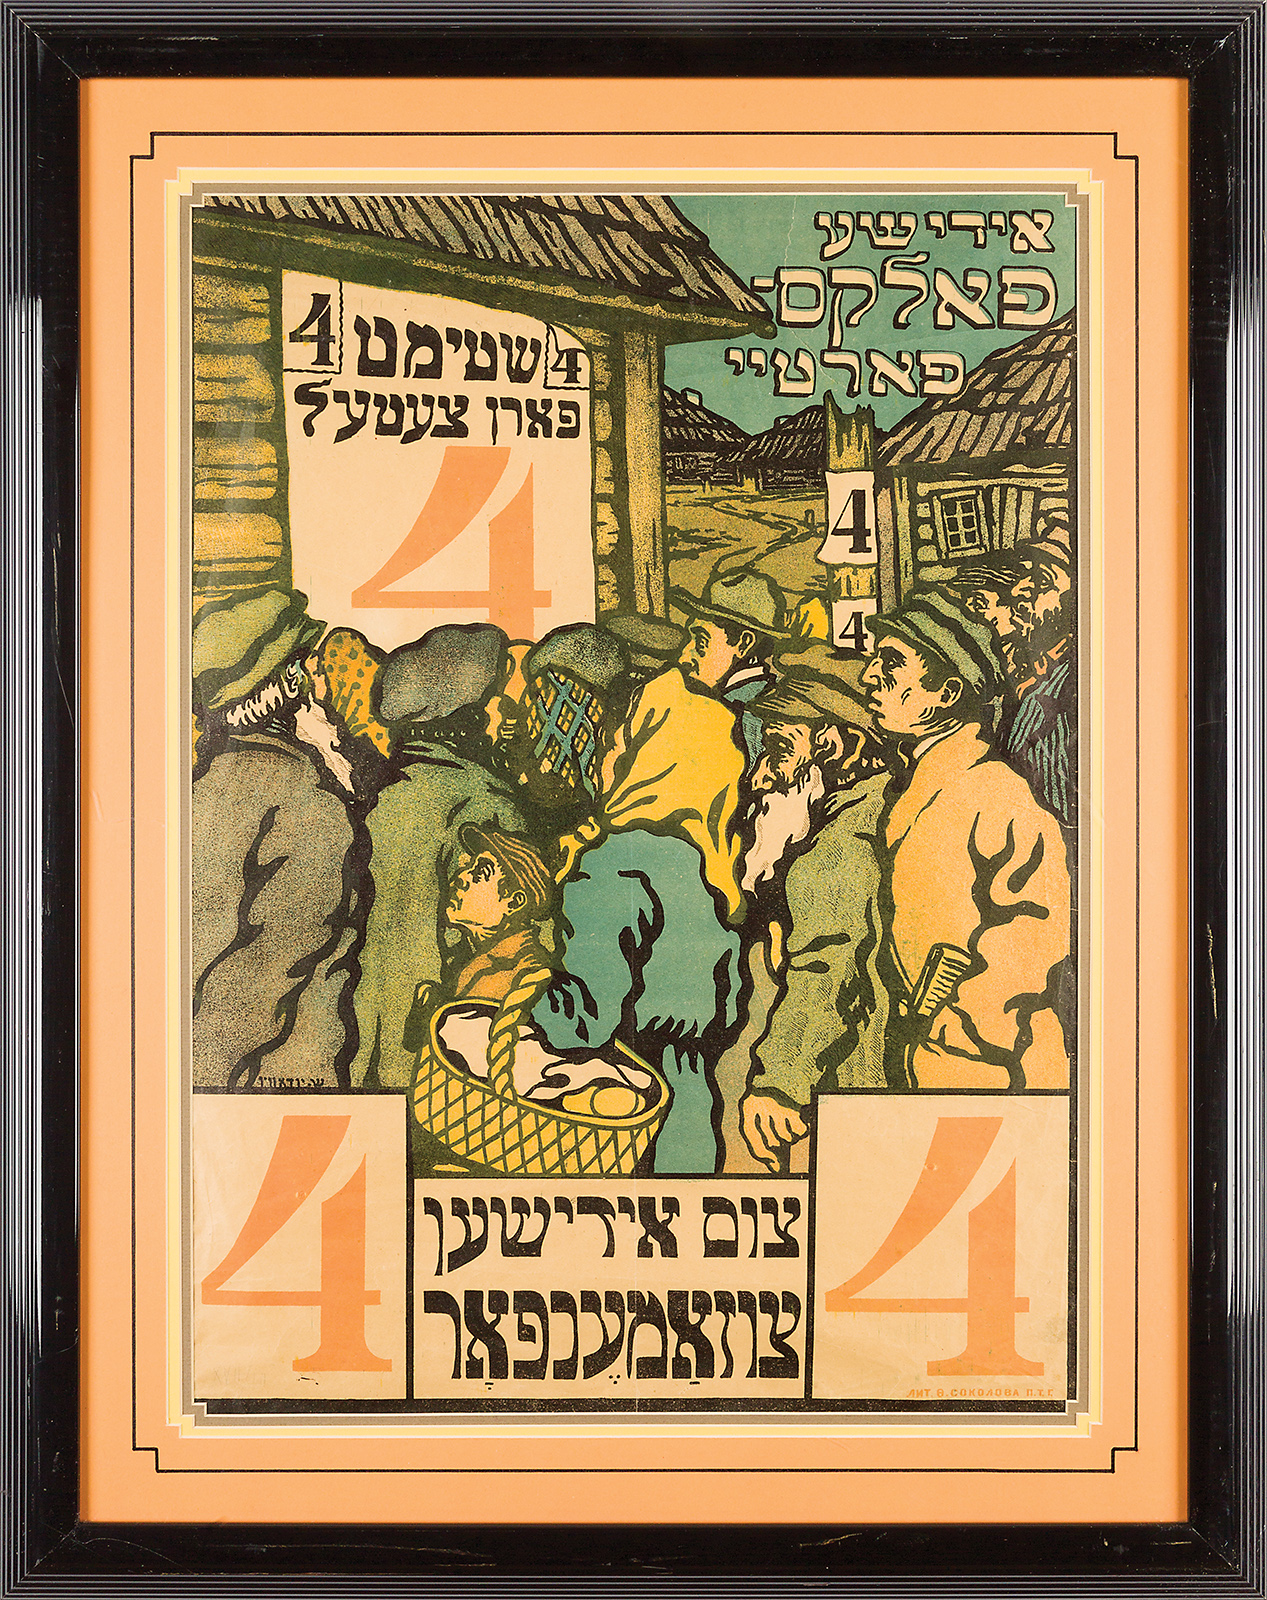  Soviet-Yiddish poster designed by Solomon Yudovin. 1917. <p>Sold at auction 22nd September, 2016. <p>Hammer-price: $11,000. 